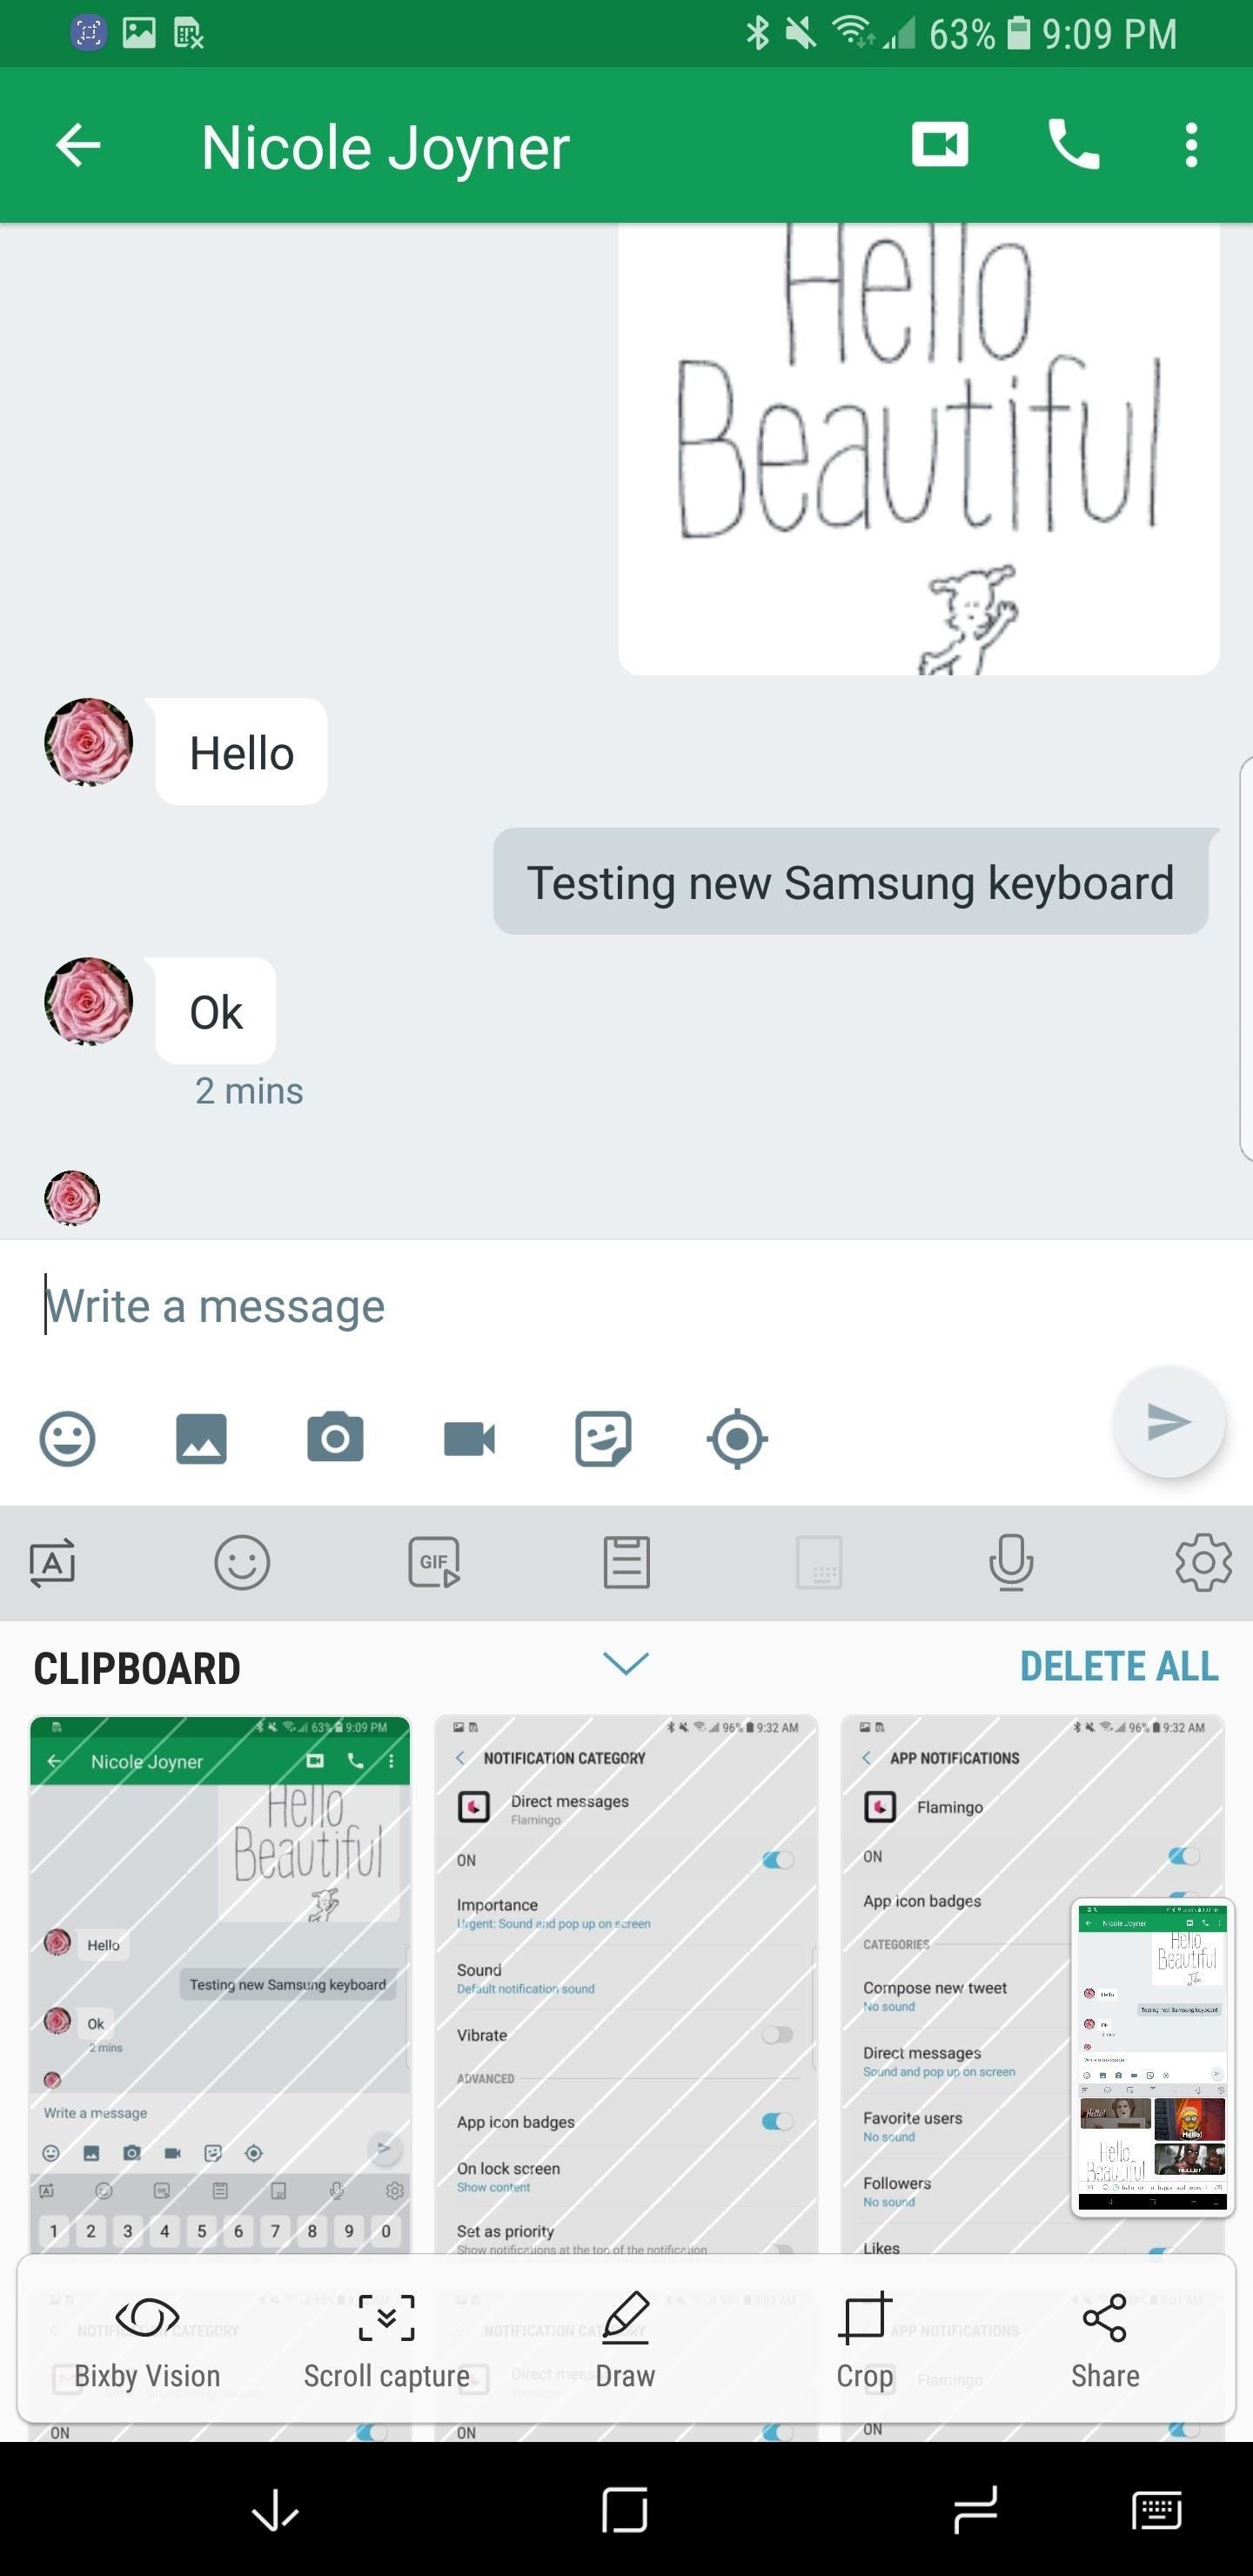 Galaxy S8 Oreo Update: Samsung Keyboard Gets an Overhaul in Android 8.0